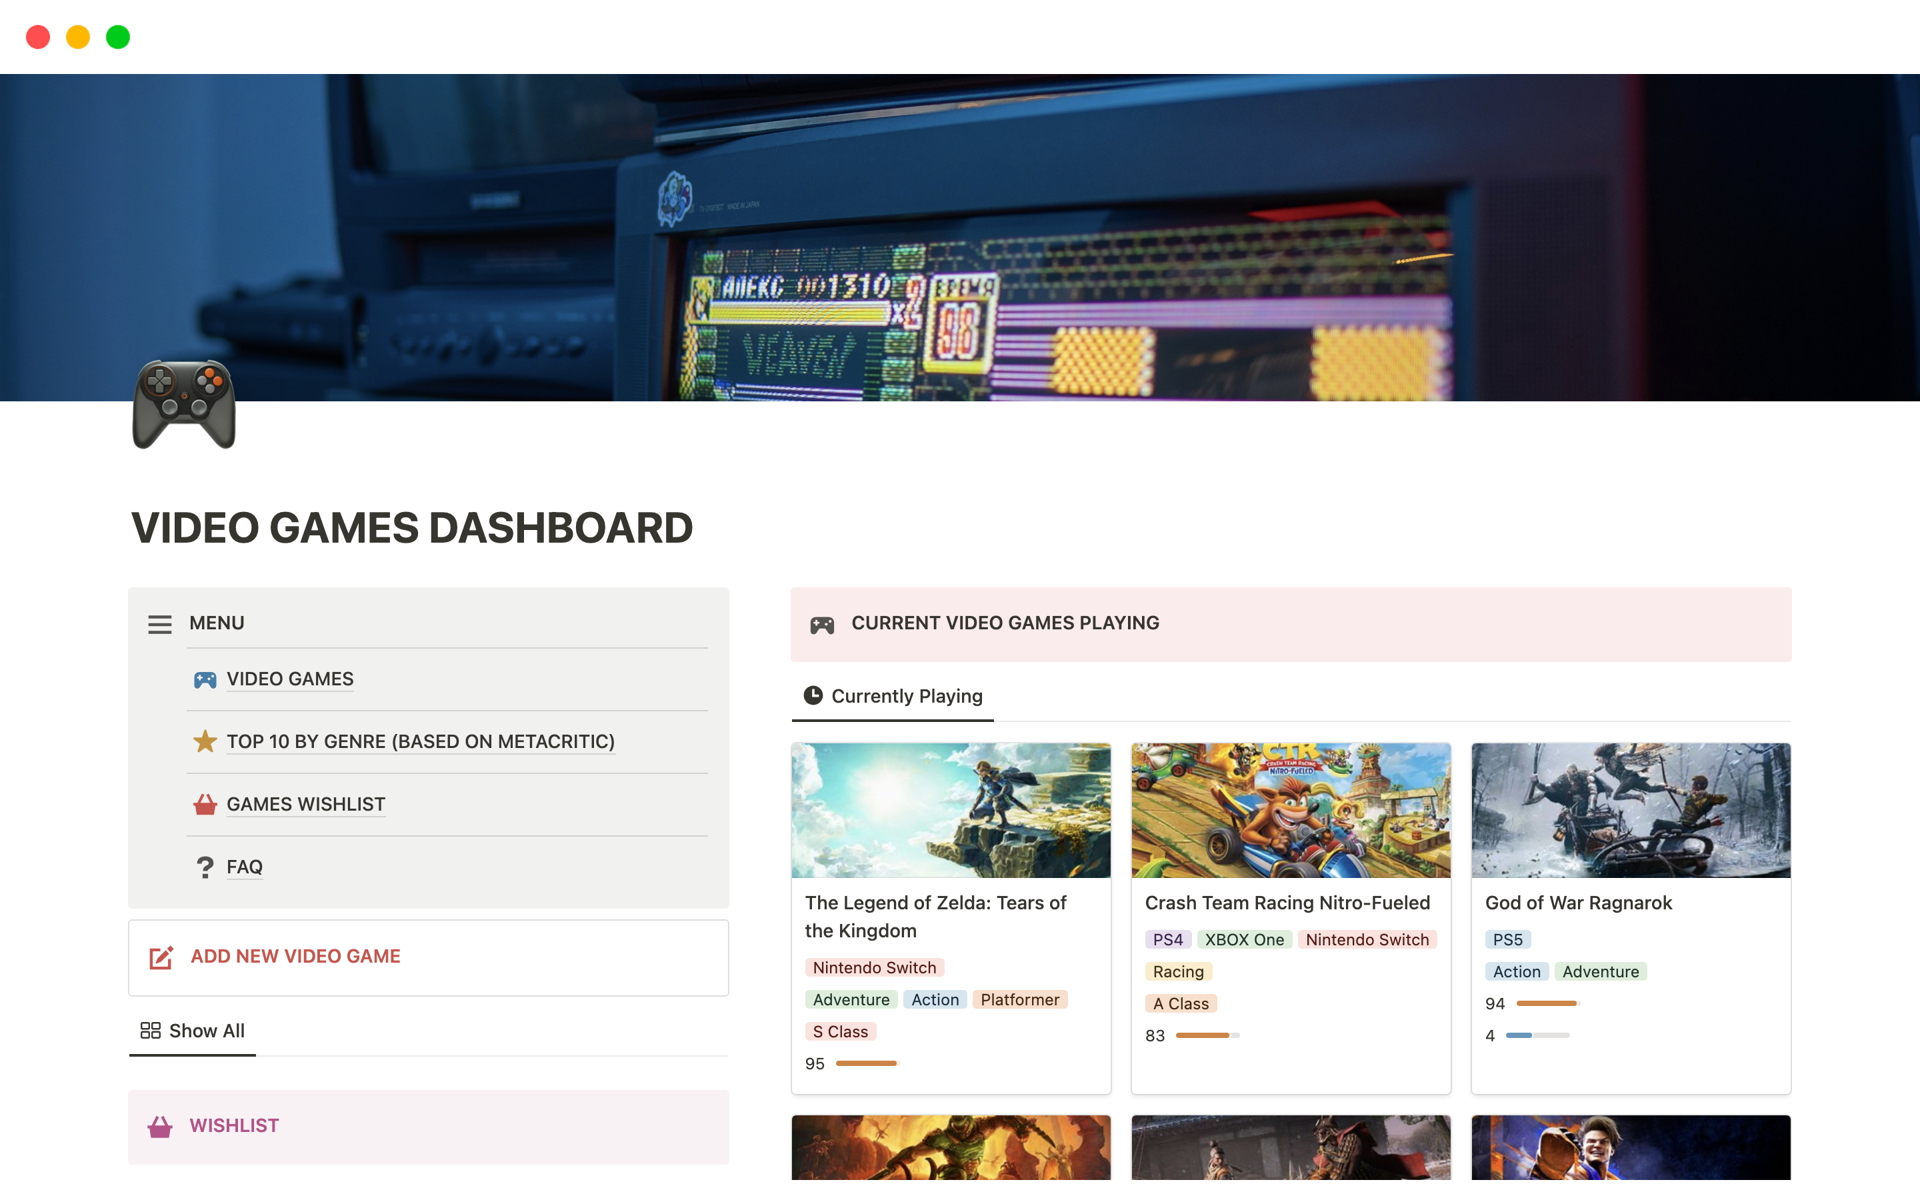 Track your video games in one place with this dashboard where you can add games to your wishlist, find a new game to play or browse what the best video games are out there.